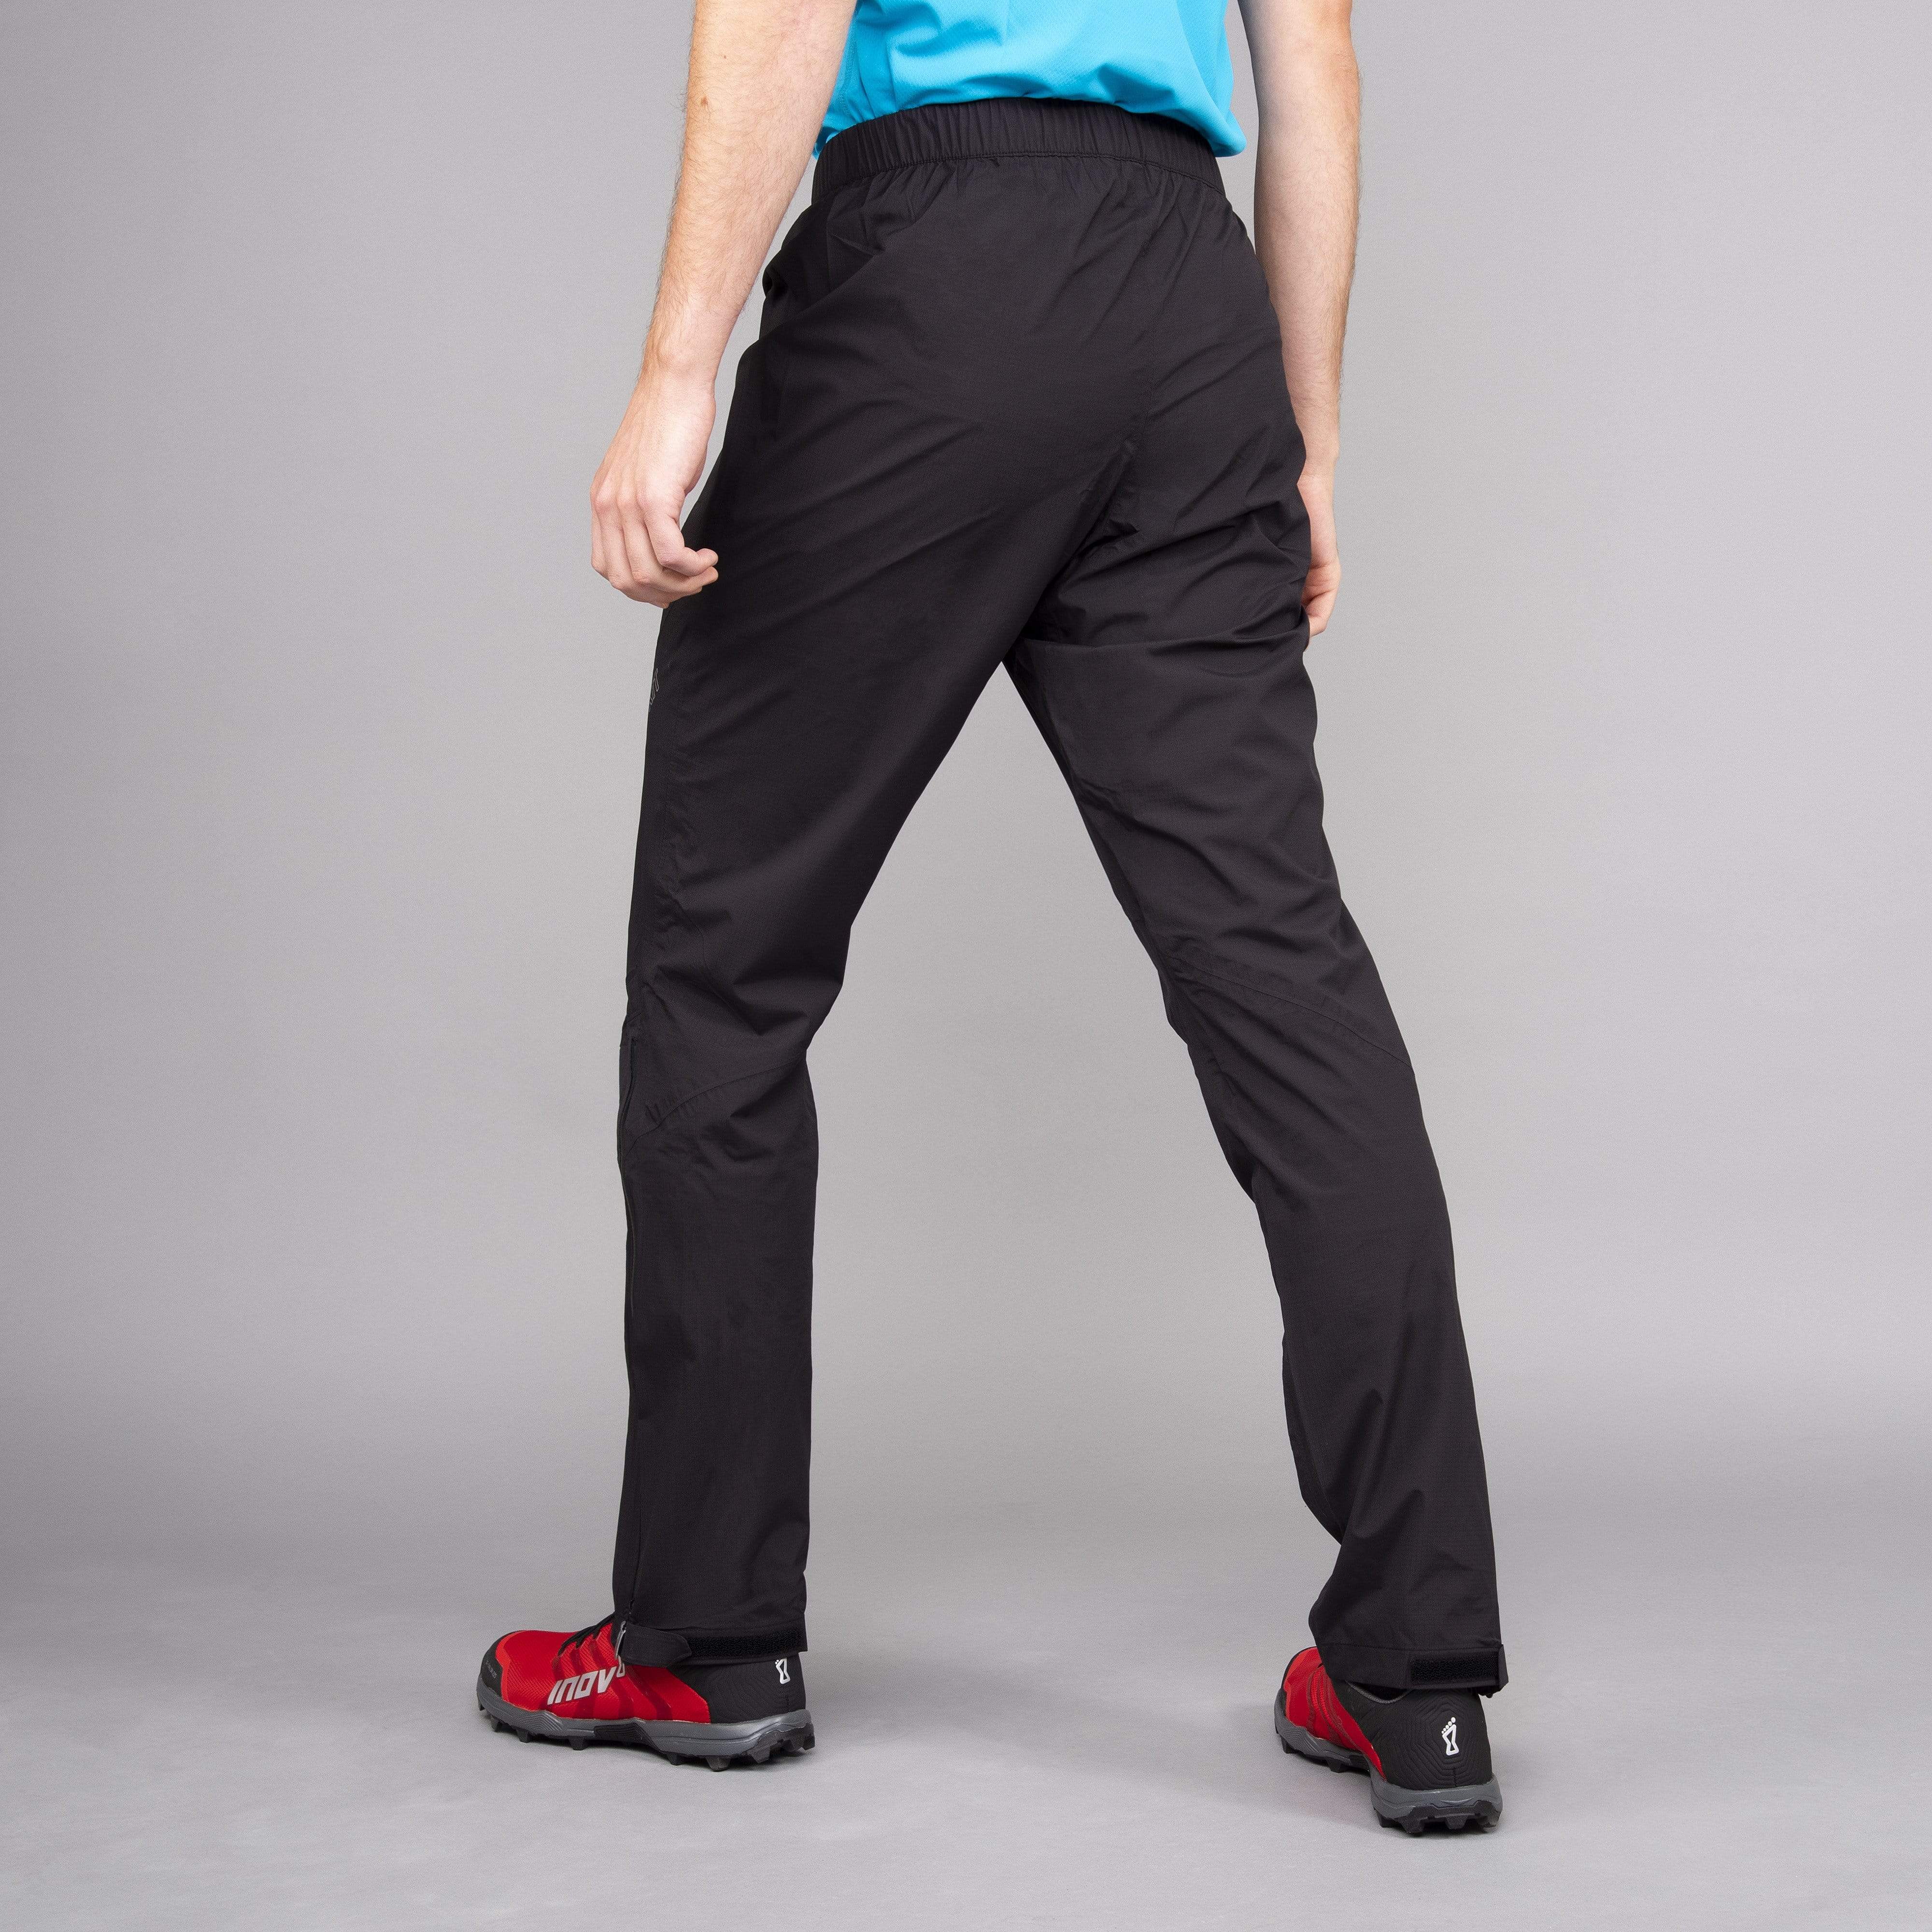 Parallax Mens Lightweight and Packable Waterproof Trousers